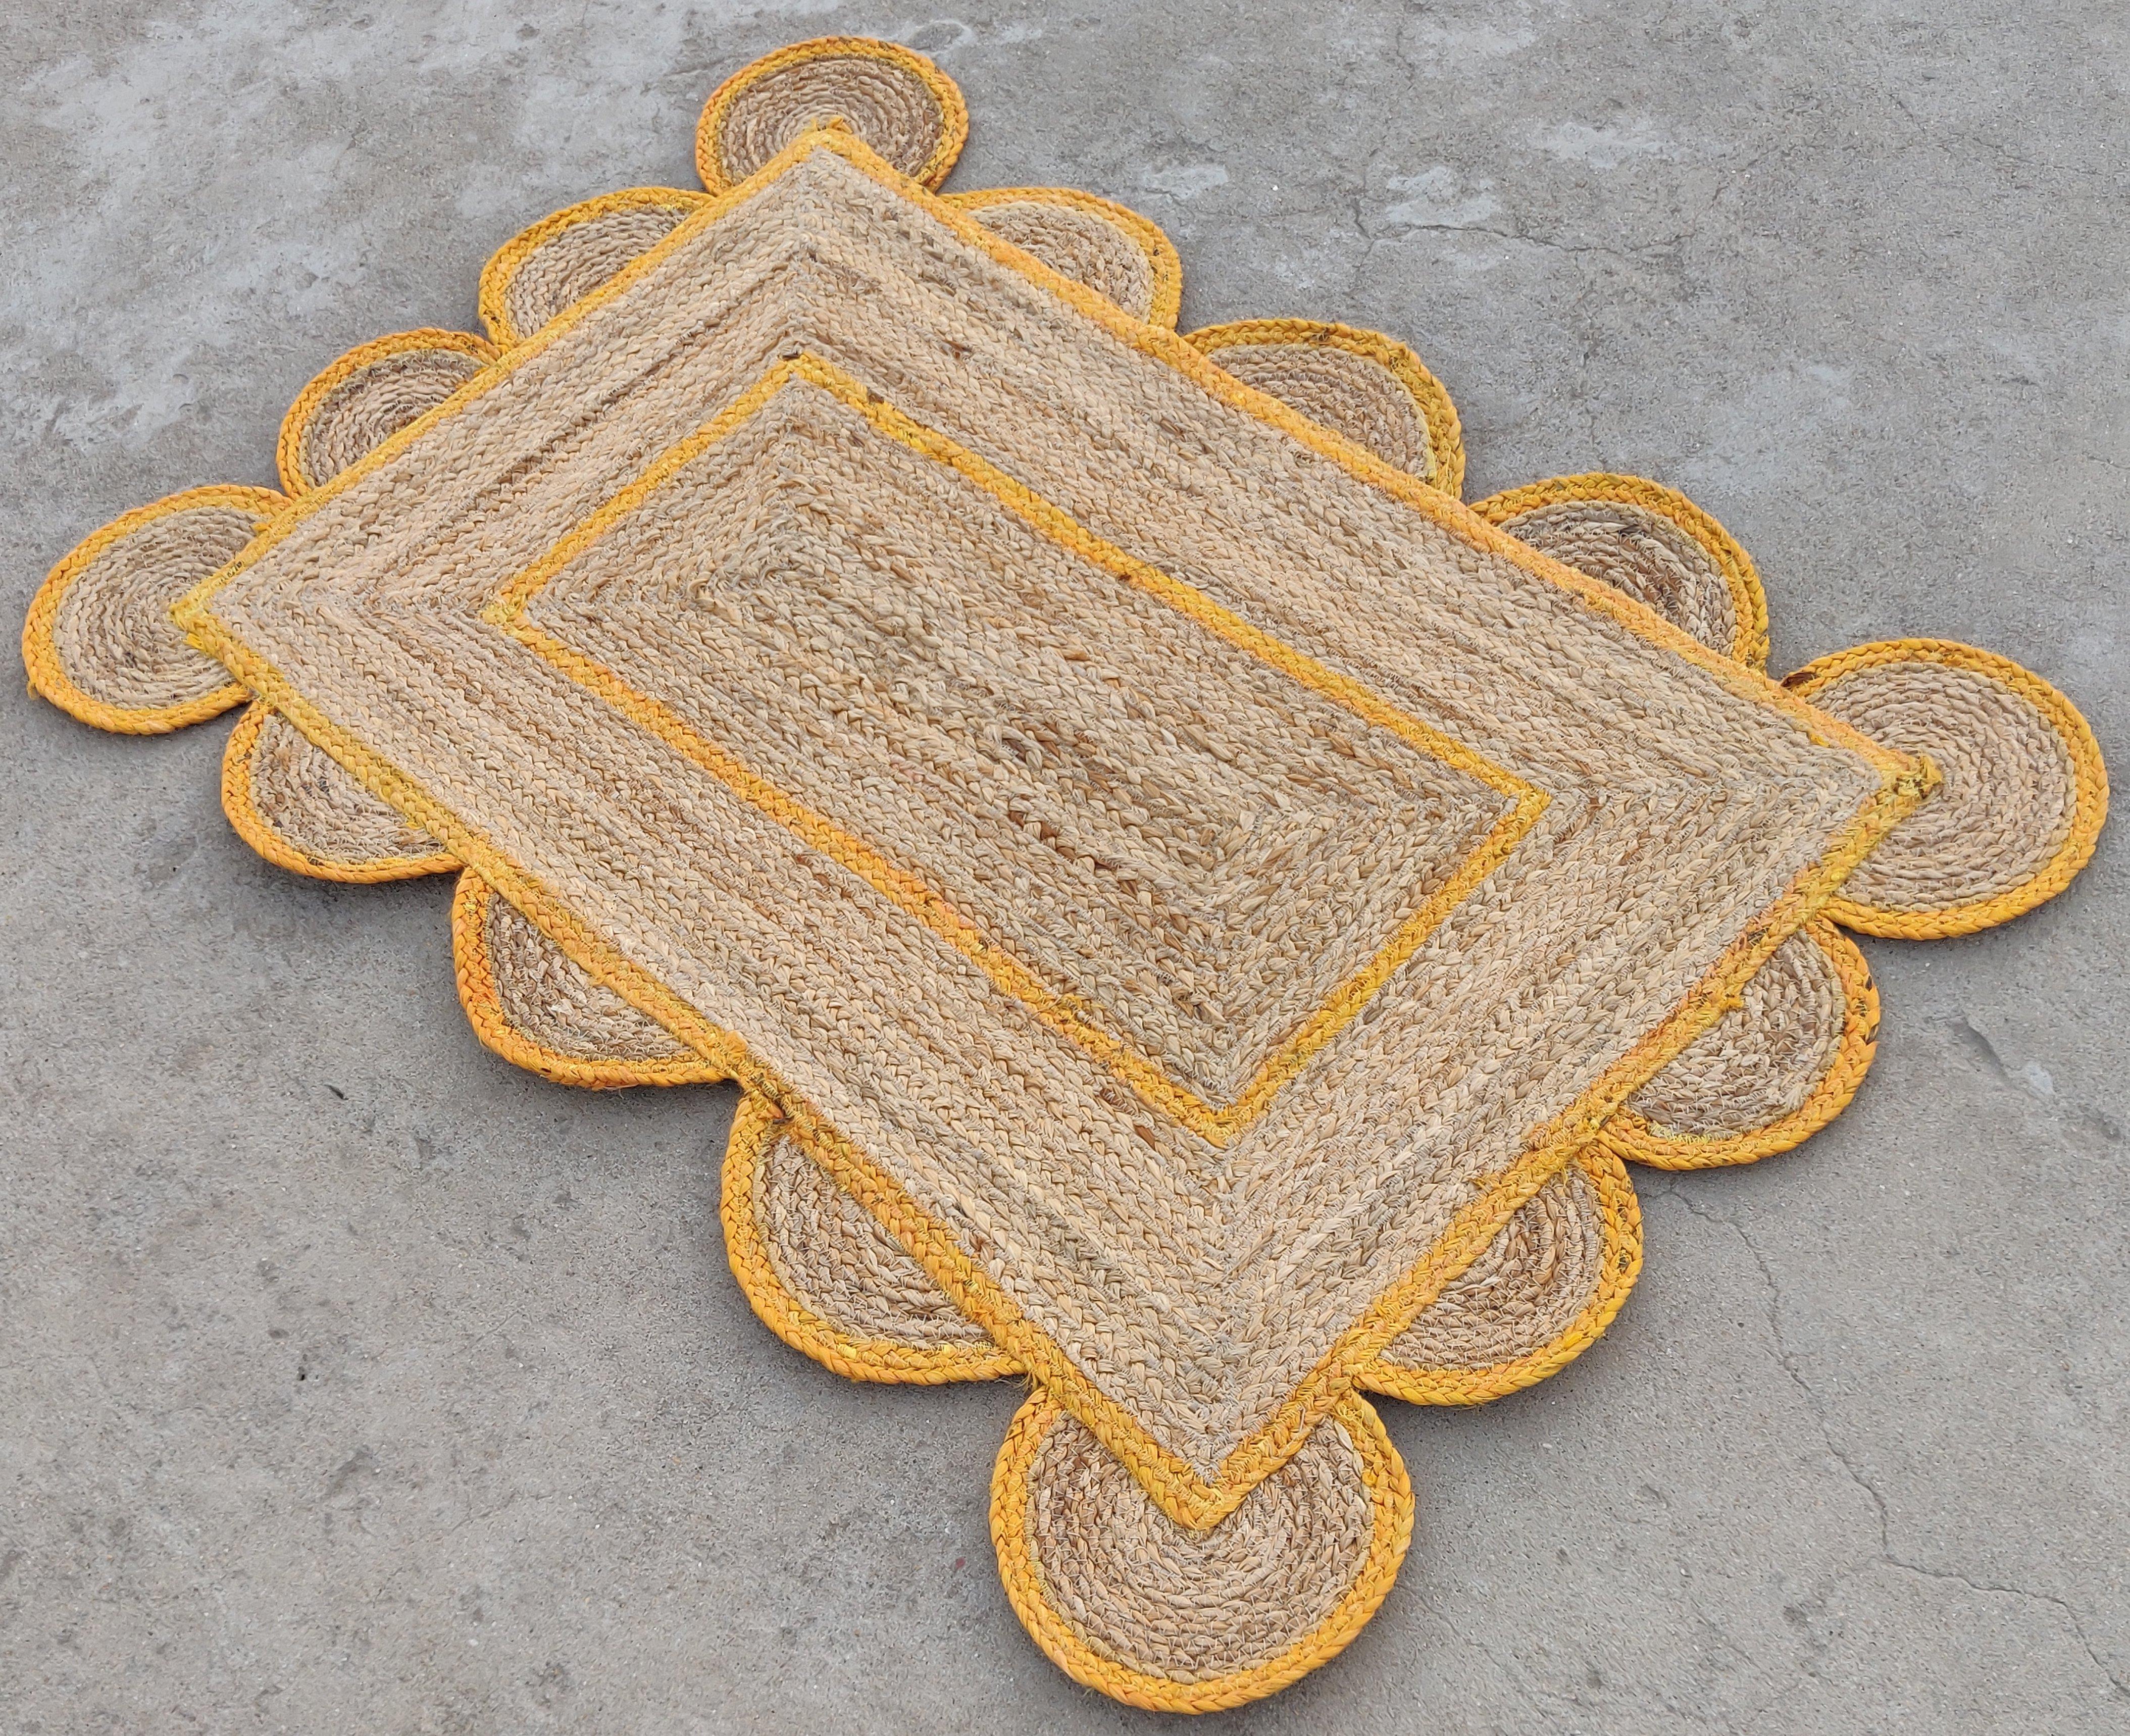 Handmade Jute Scalloped Rug, Natural Jute Dhurrie with Orange Border -2'x3'

These special flat-weave dhurries are hand-woven with 15 ply 100% cotton yarn. Due to the special manufacturing techniques used to create our rugs, the size and color of